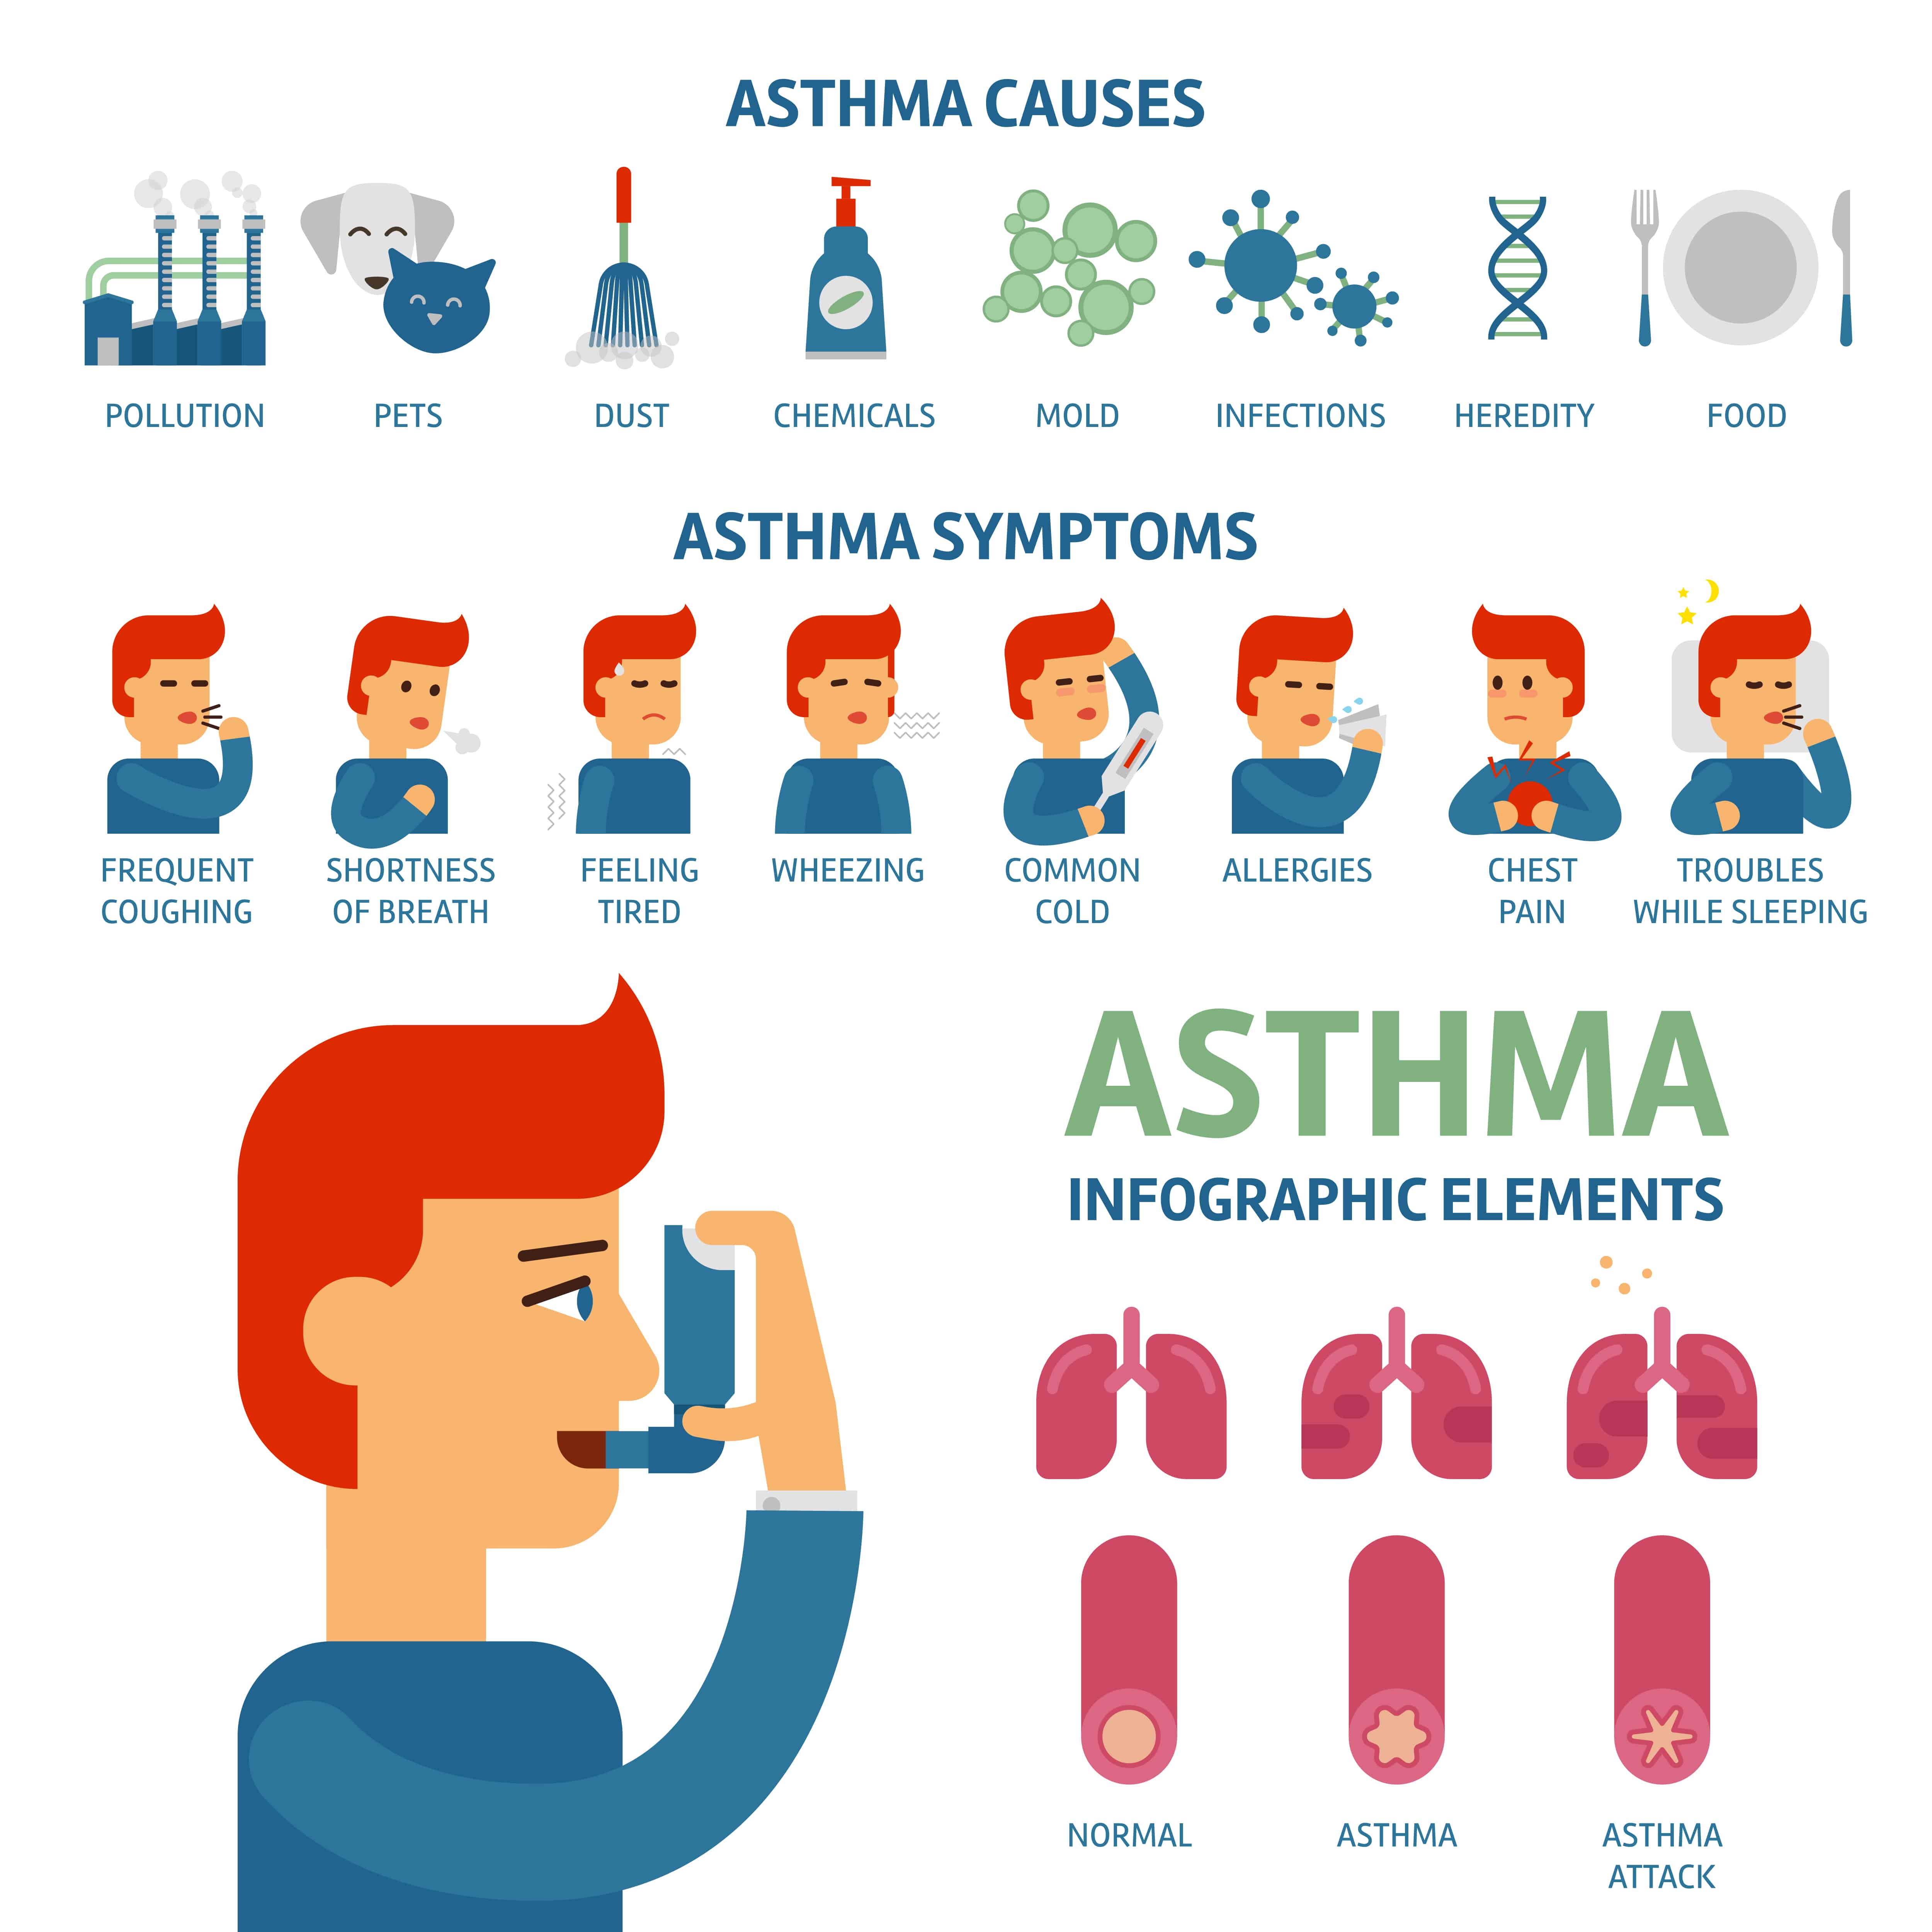 What Are The Best Essential Oils and Recipes For Asthma Relief And Treatment? Essential Oil Benefits